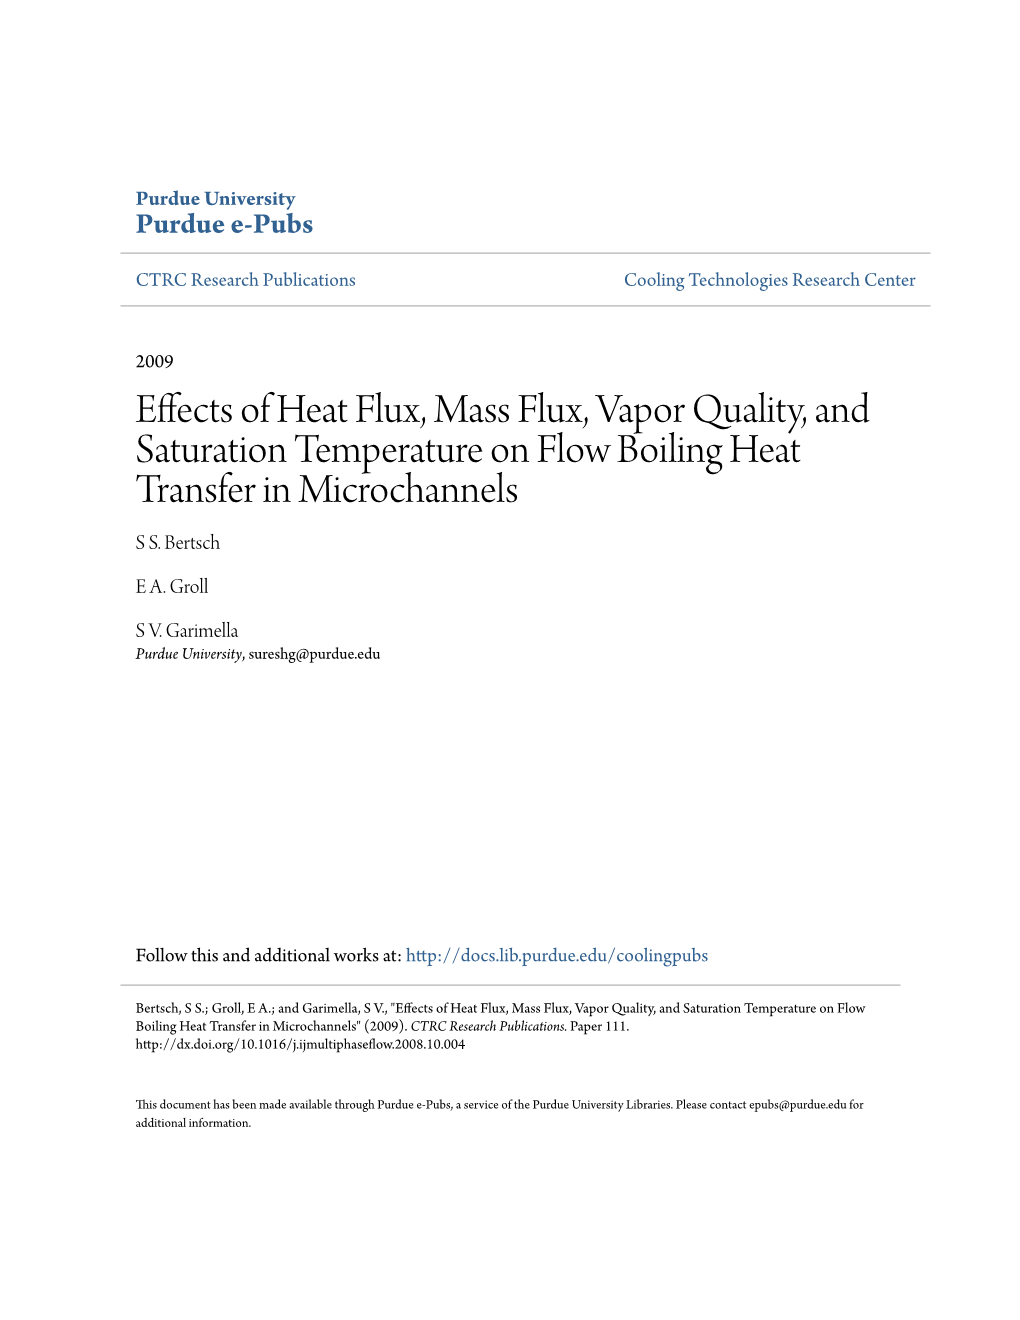 Effects of Heat Flux, Mass Flux, Vapor Quality, and Saturation Temperature on Flow Boiling Heat Transfer in Microchannels S S